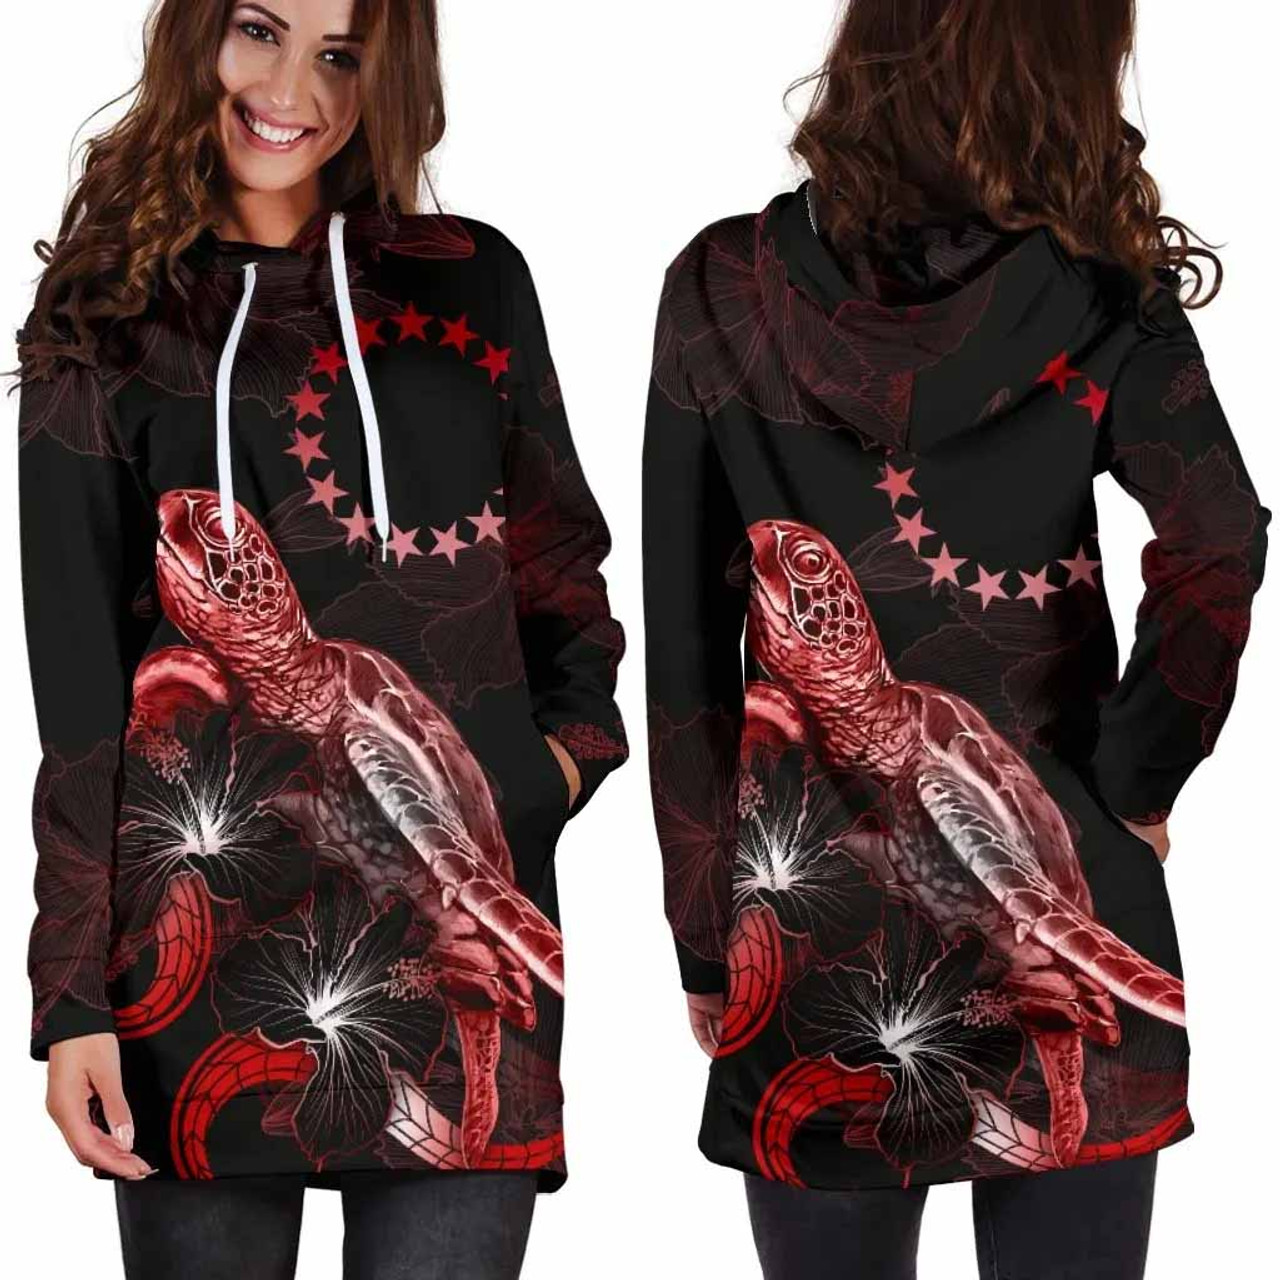 Cook Islands Polynesian Hoodie Dress - Turtle With Blooming Hibiscus Red 2